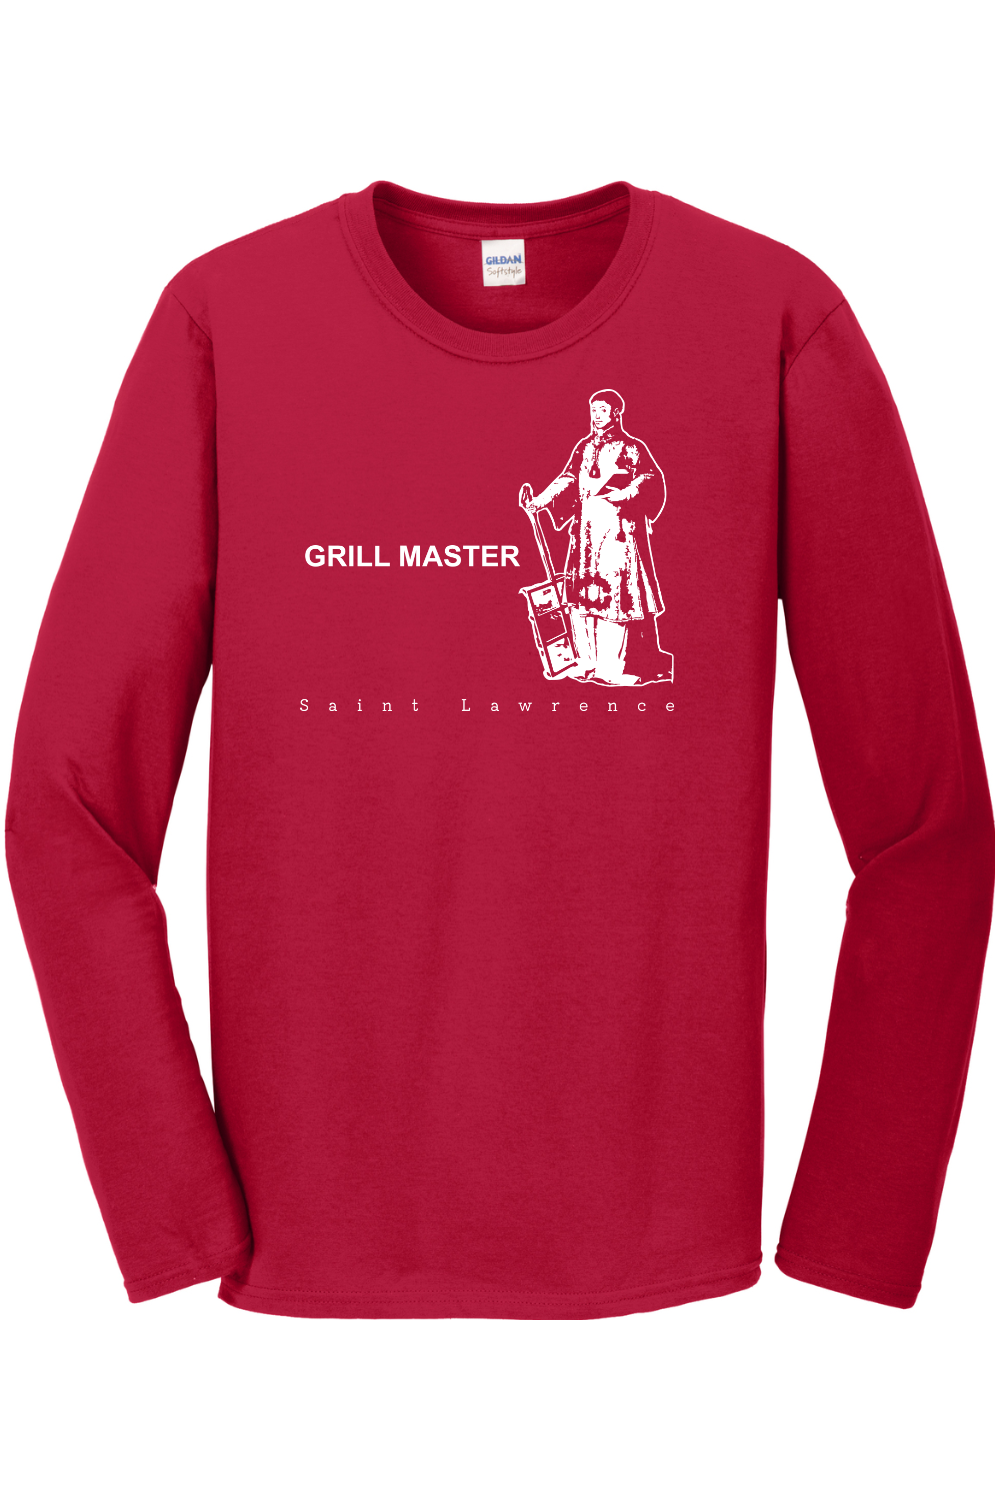 Grill Master - St. Lawrence Long Sleeve